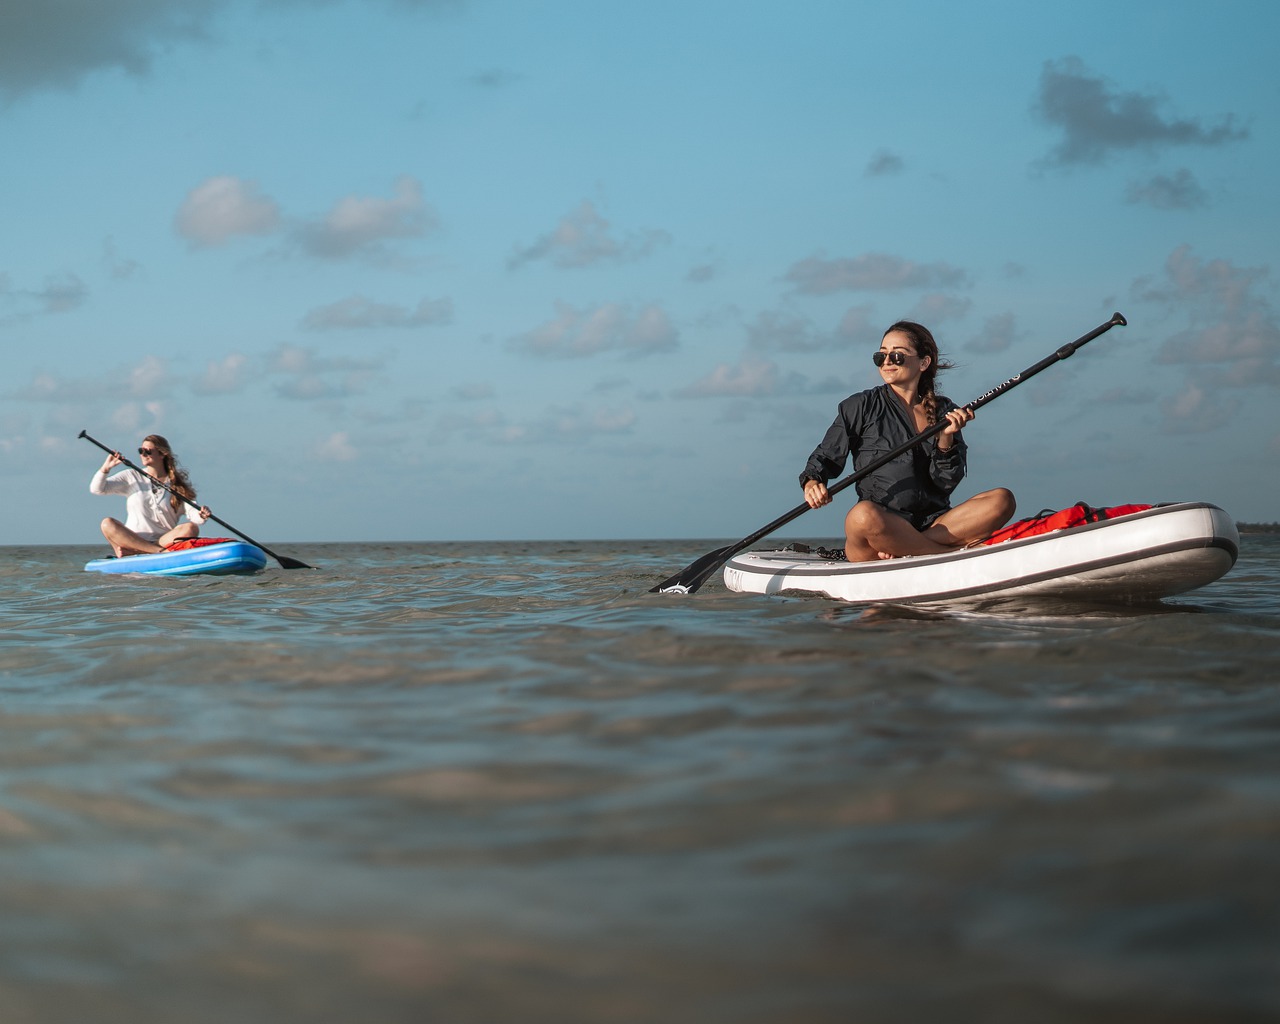 image of 2 women paddle boarding on the ocean